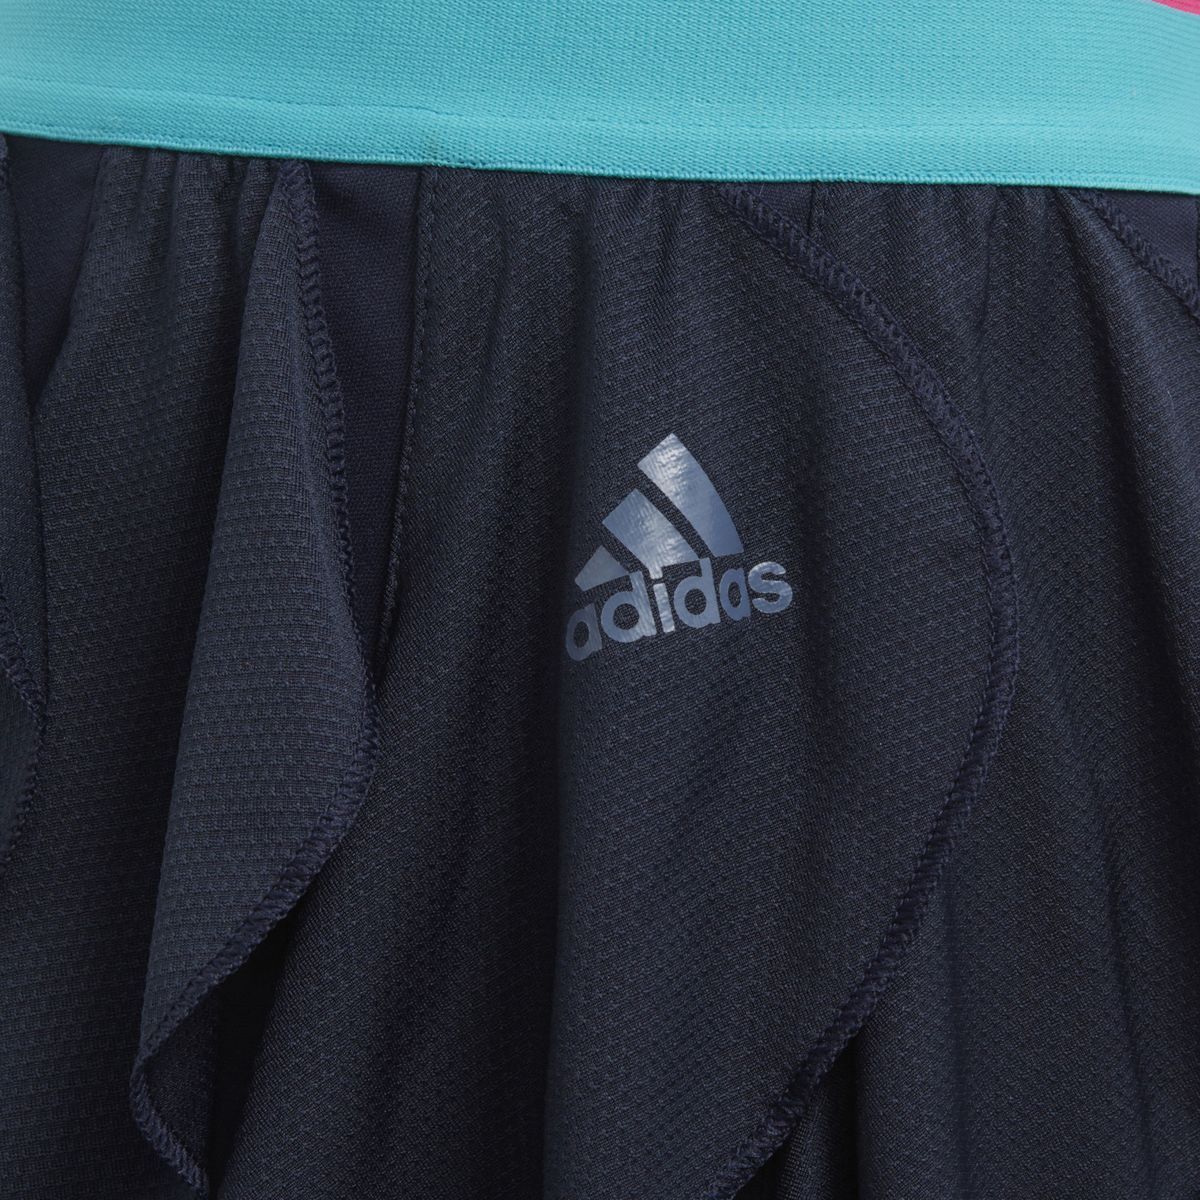    Adidas G Frilly Skirt, : . DH2807.  116